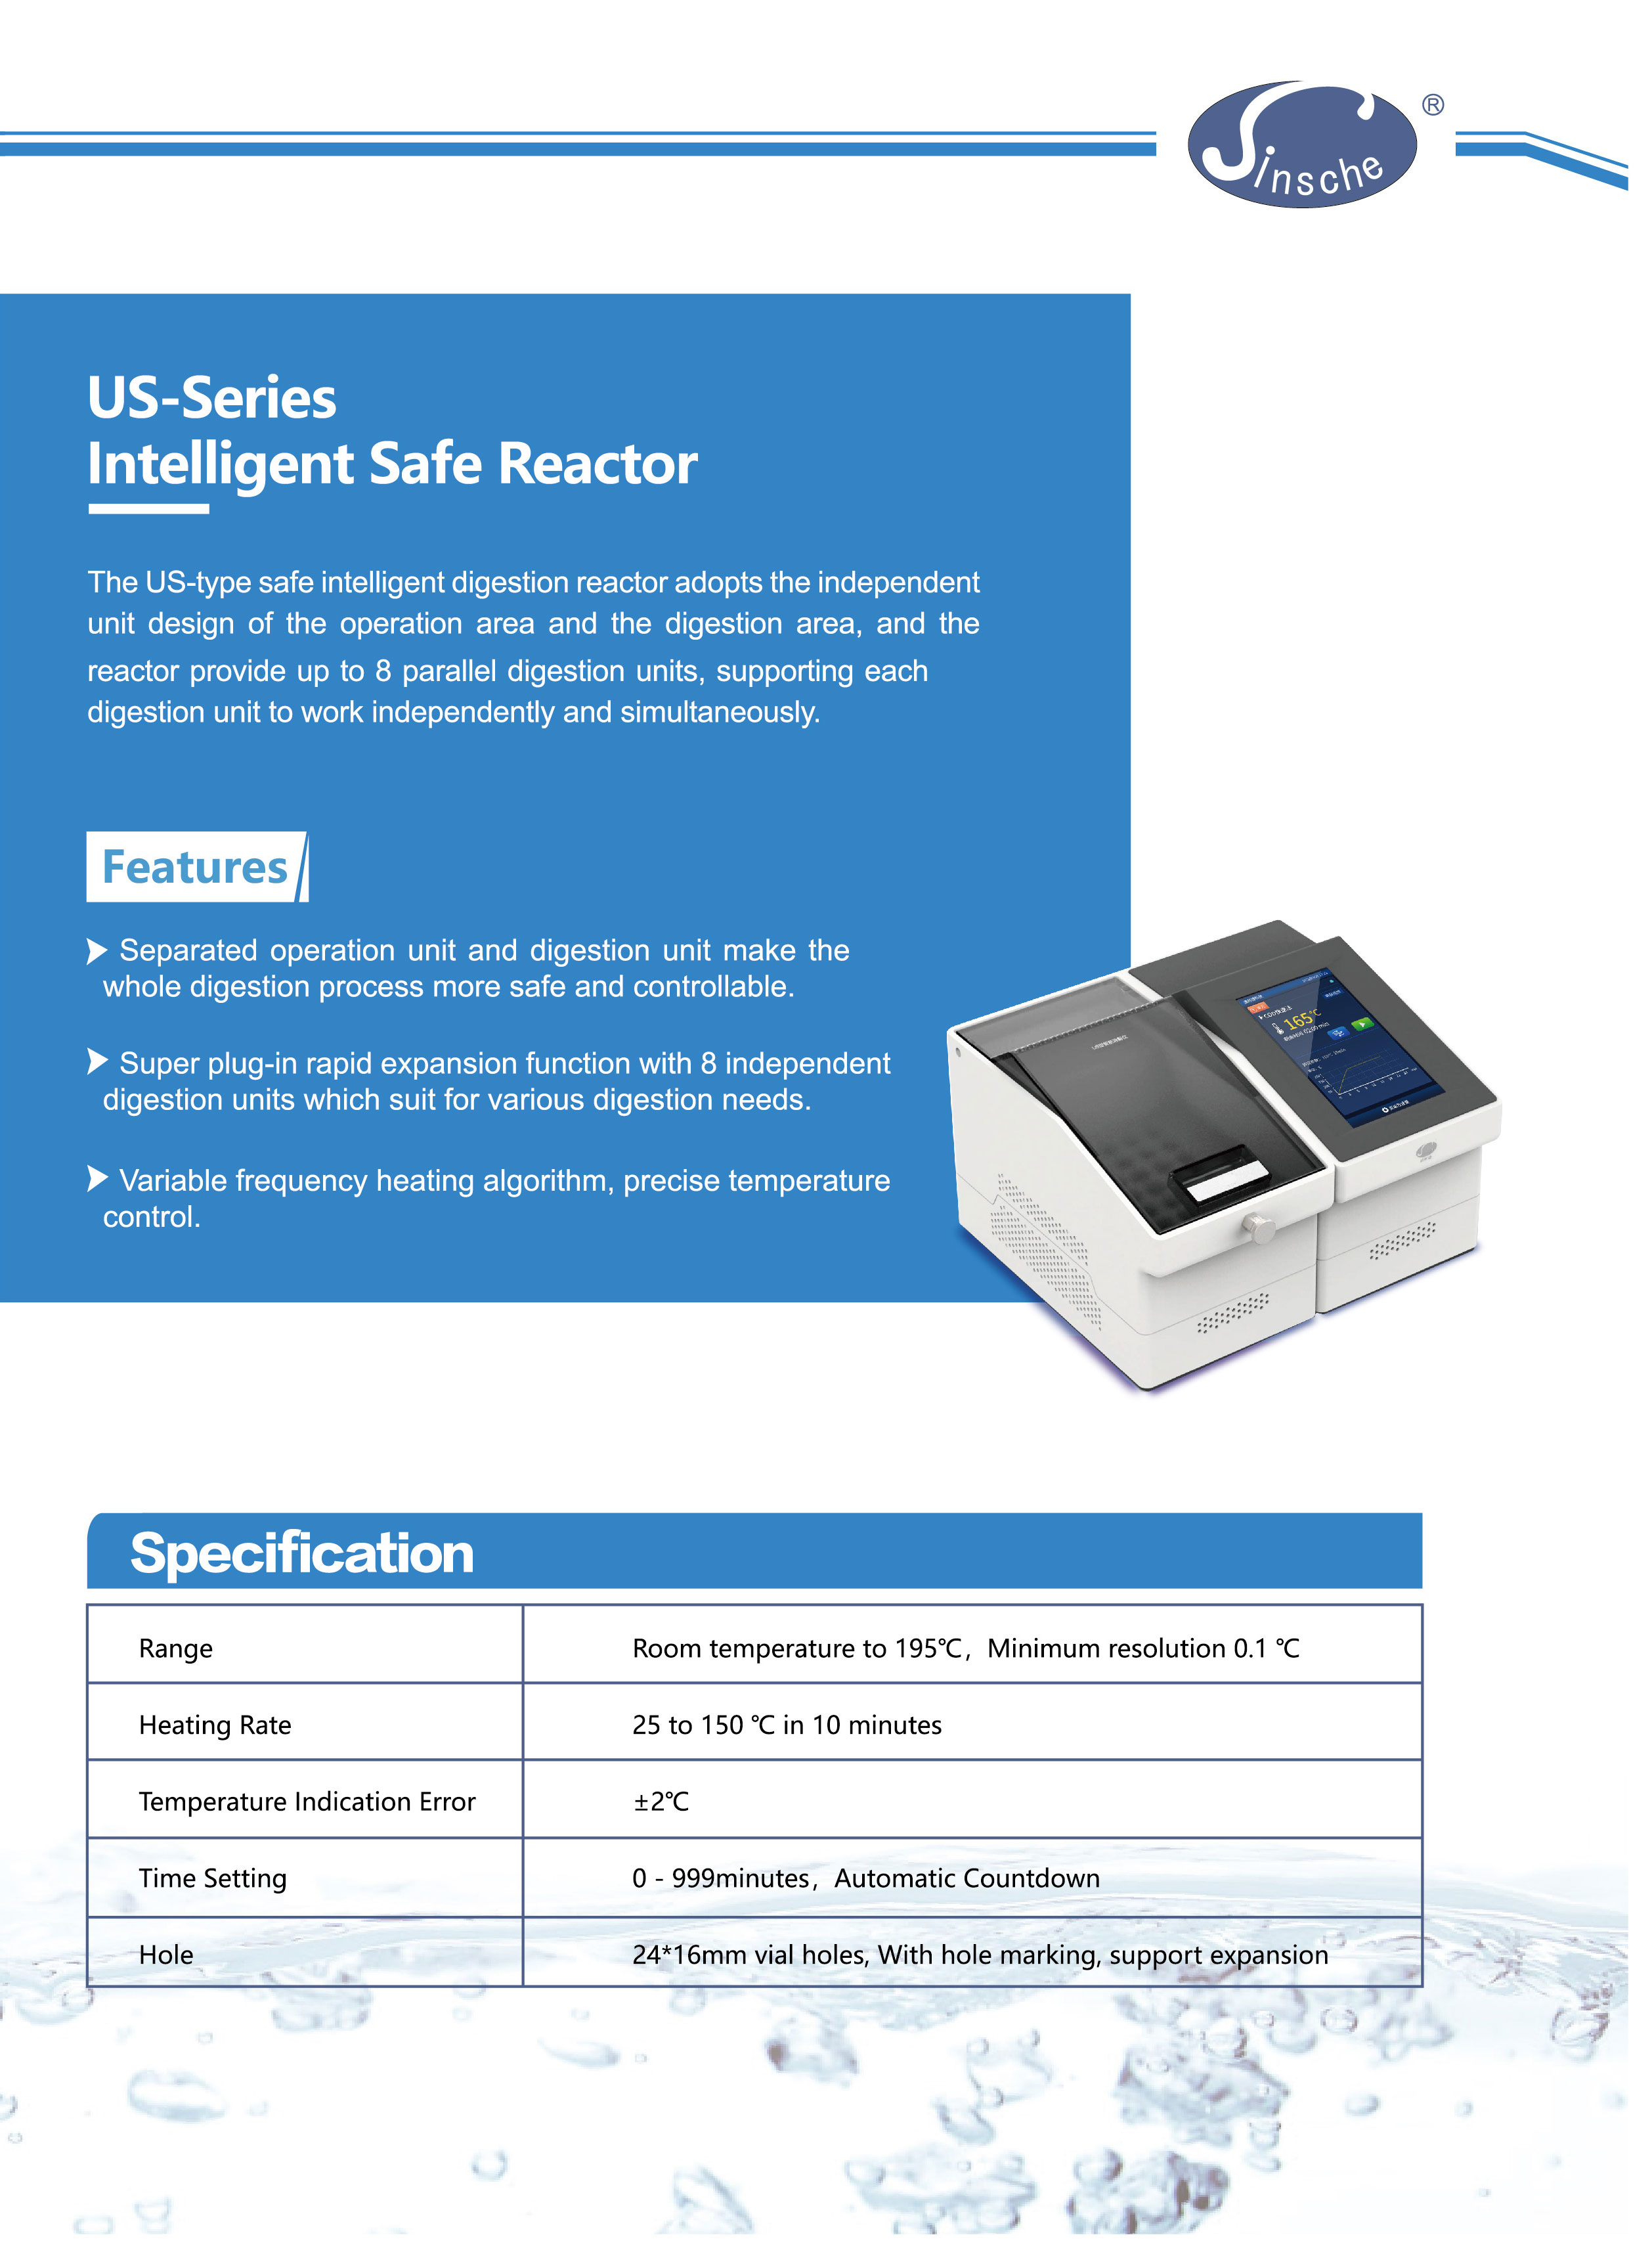 Sinsche’s new products : US-Series Intelligent Safe Reactor open a new safe era for digestion.